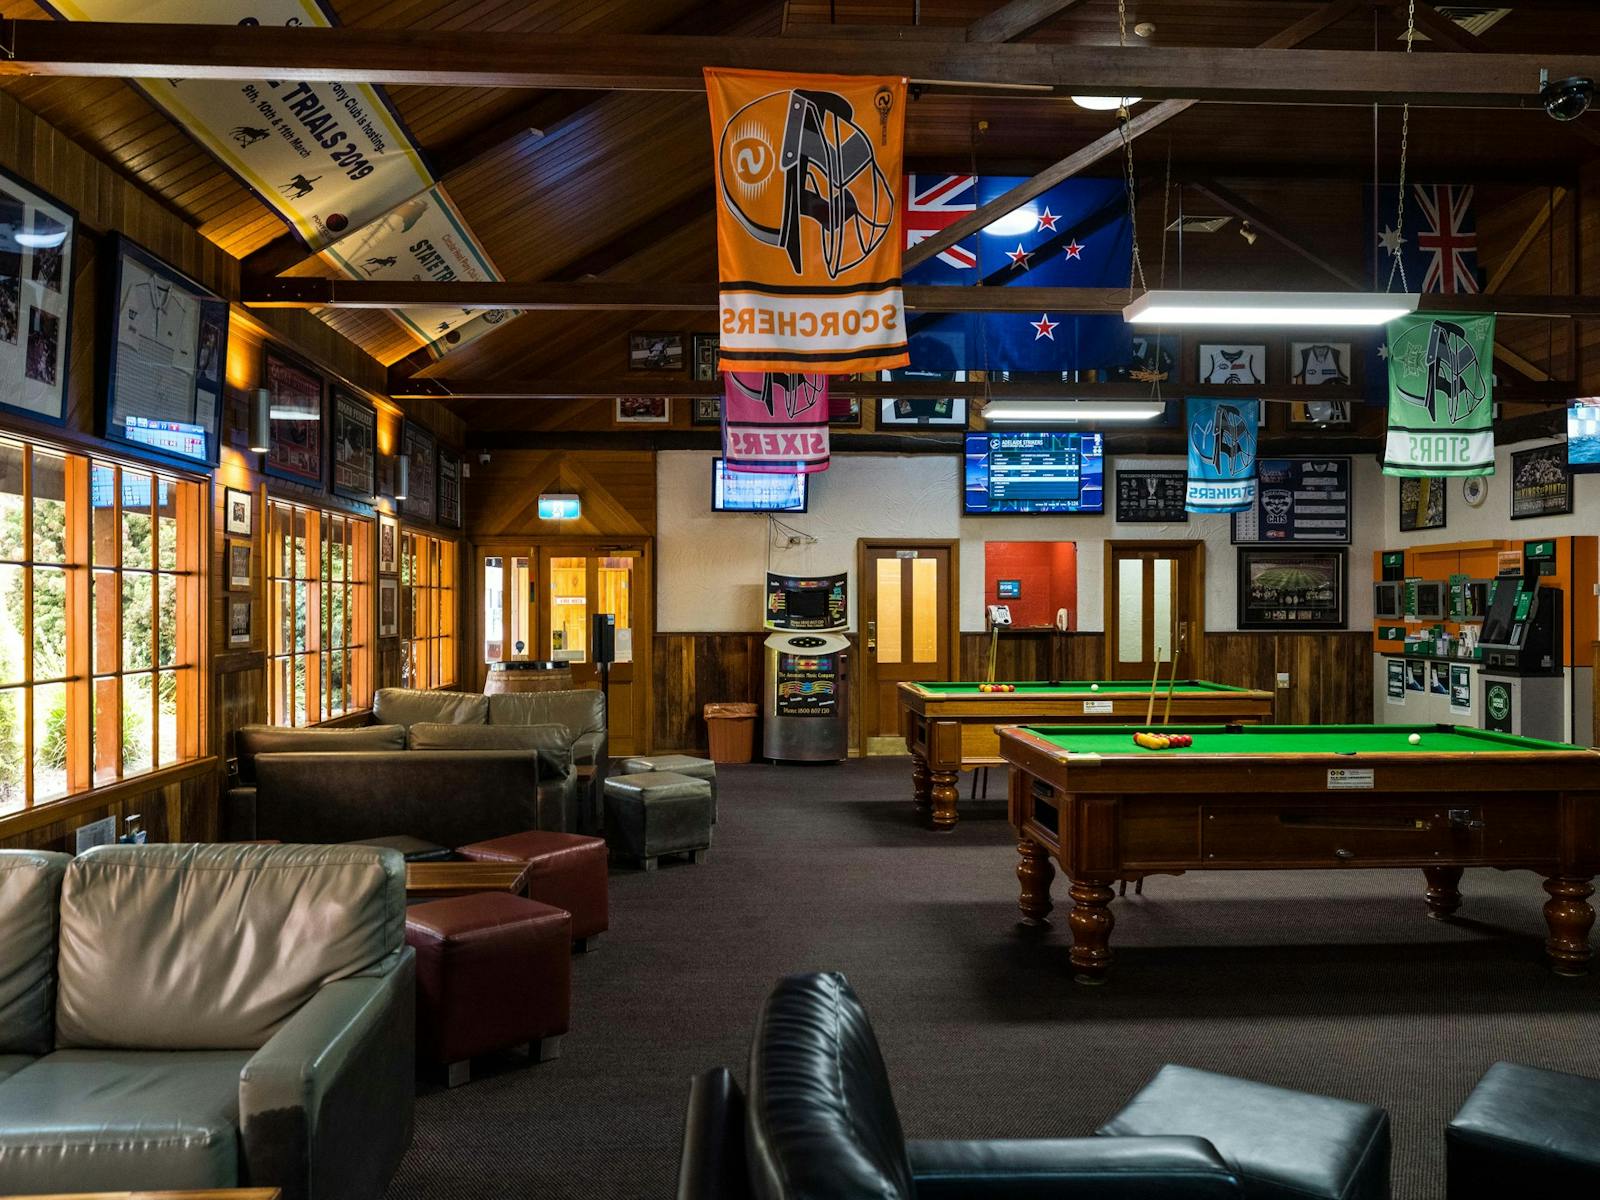 View of Millers Sports Bar with couches, pool tables, juke box and lots of sporting memorabillia